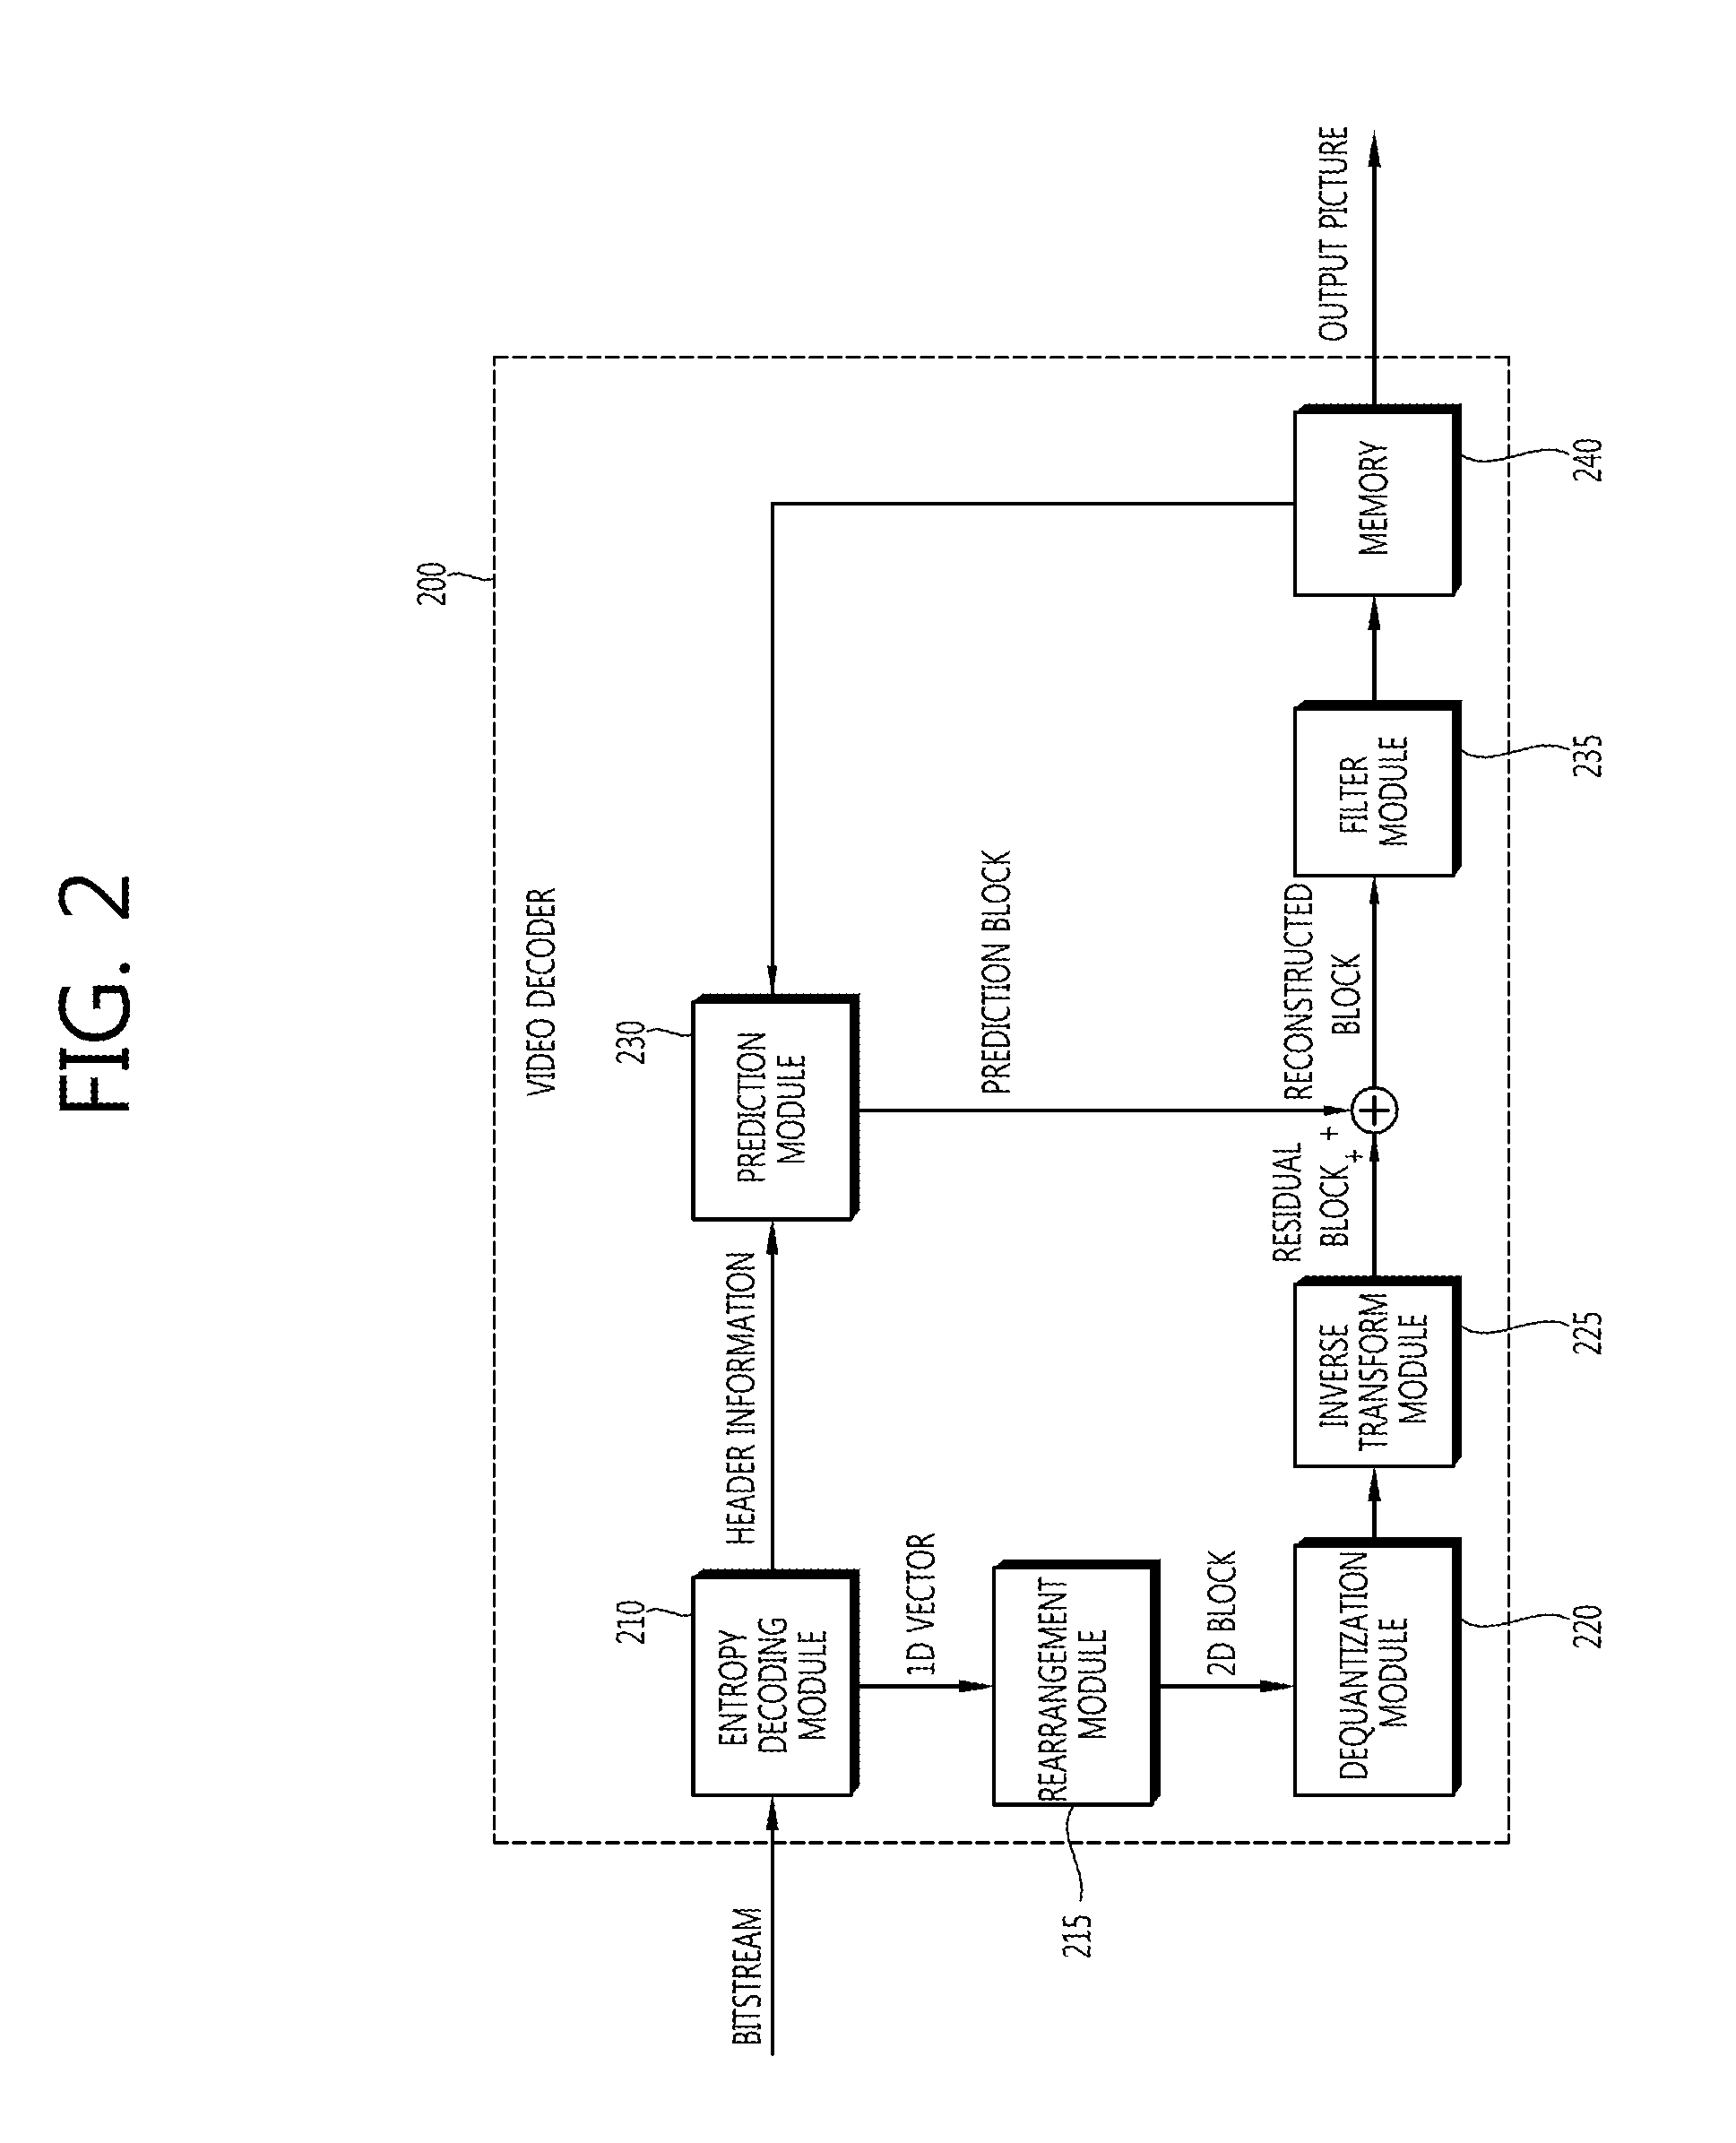 Method and apparatus for encoding/decoding image information